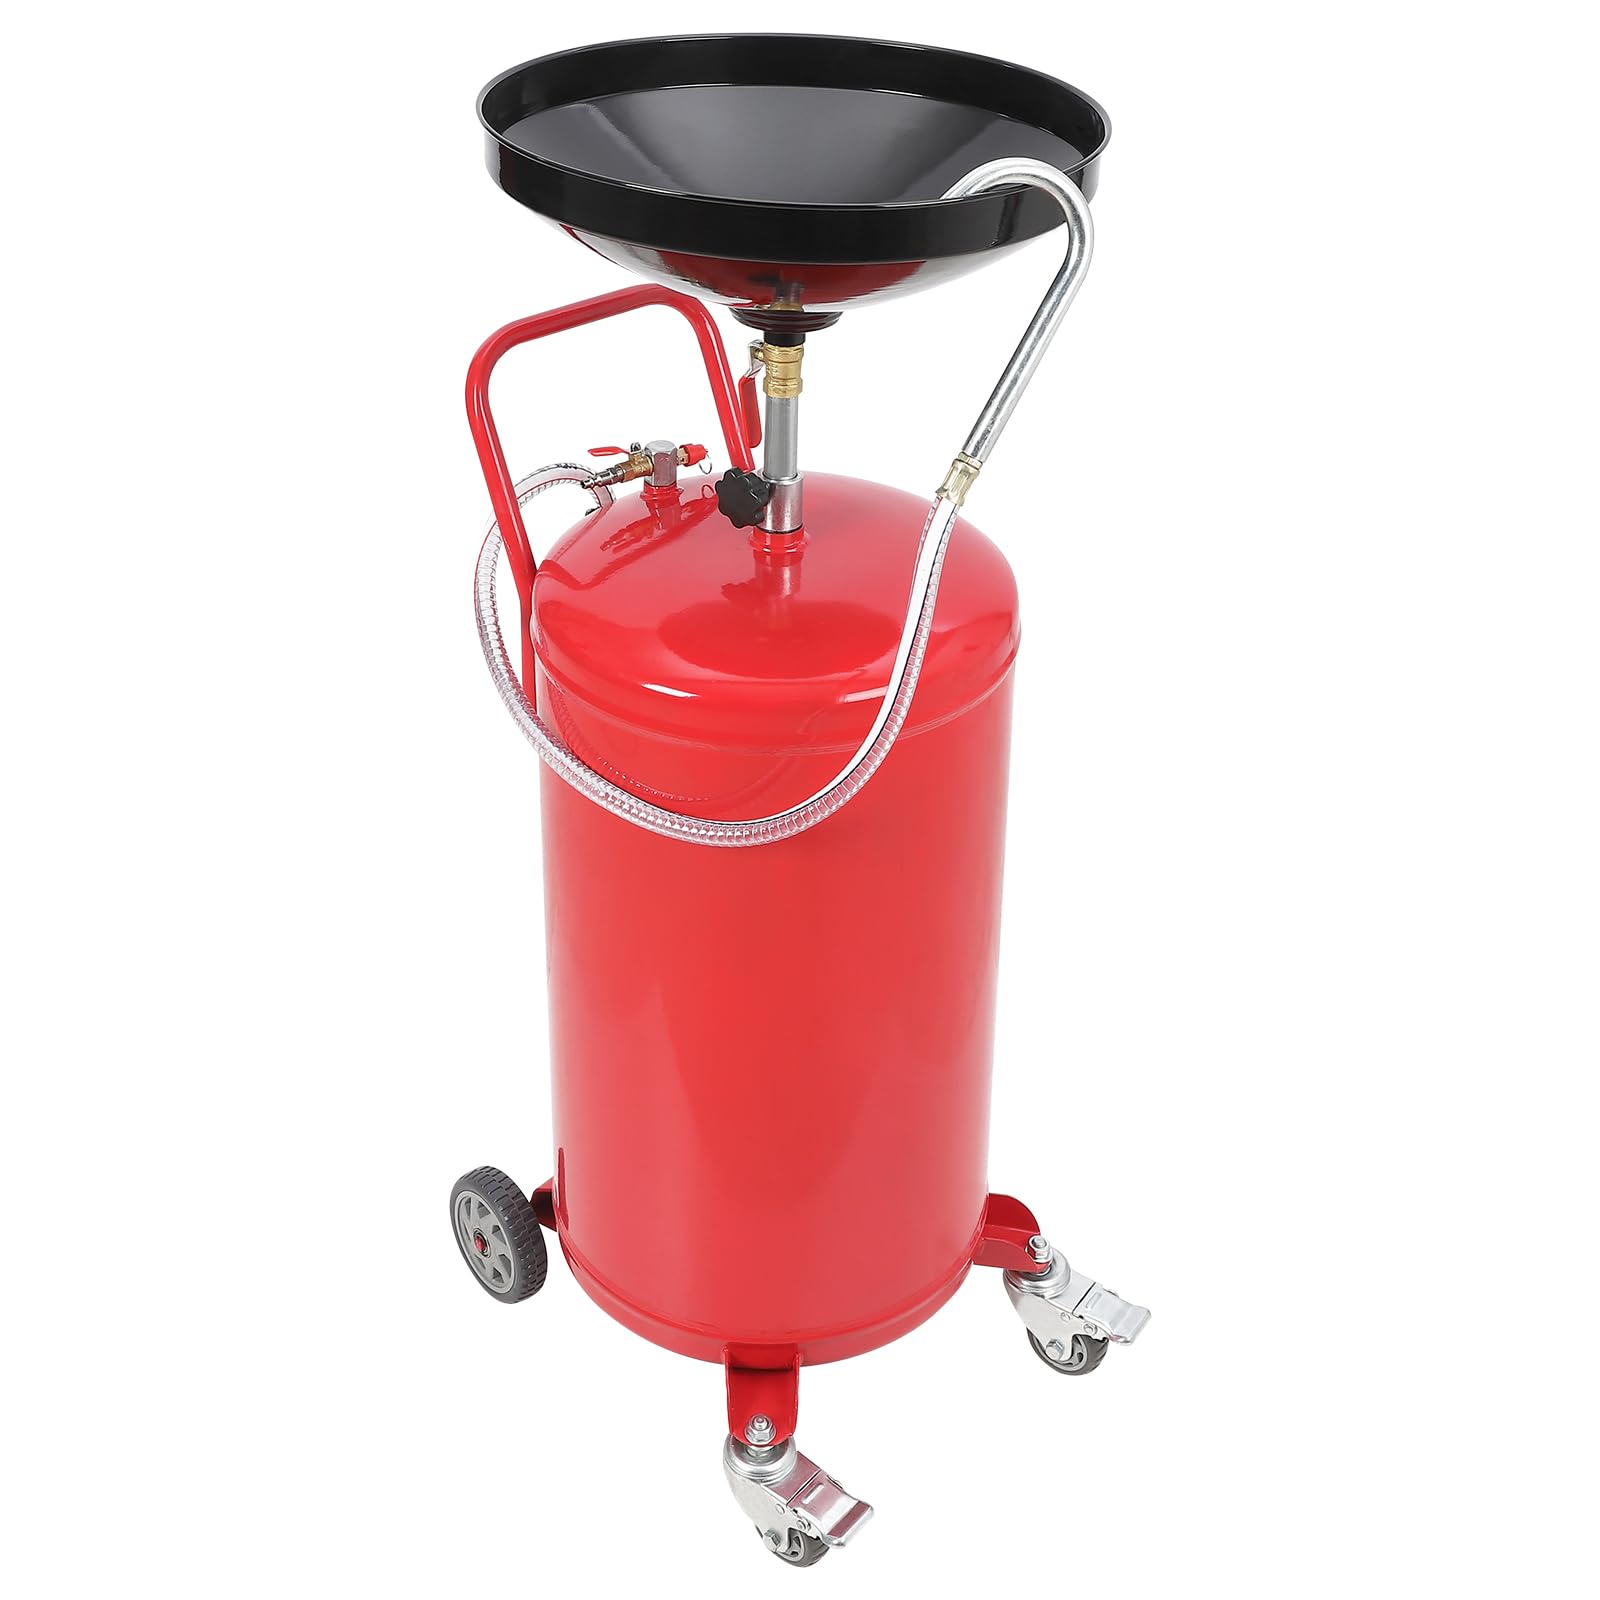 Industrial Portable Waste Oil Drainer, Multi-Spec, Capacity Up to 20 Gal,  Adjustable, with Funnel